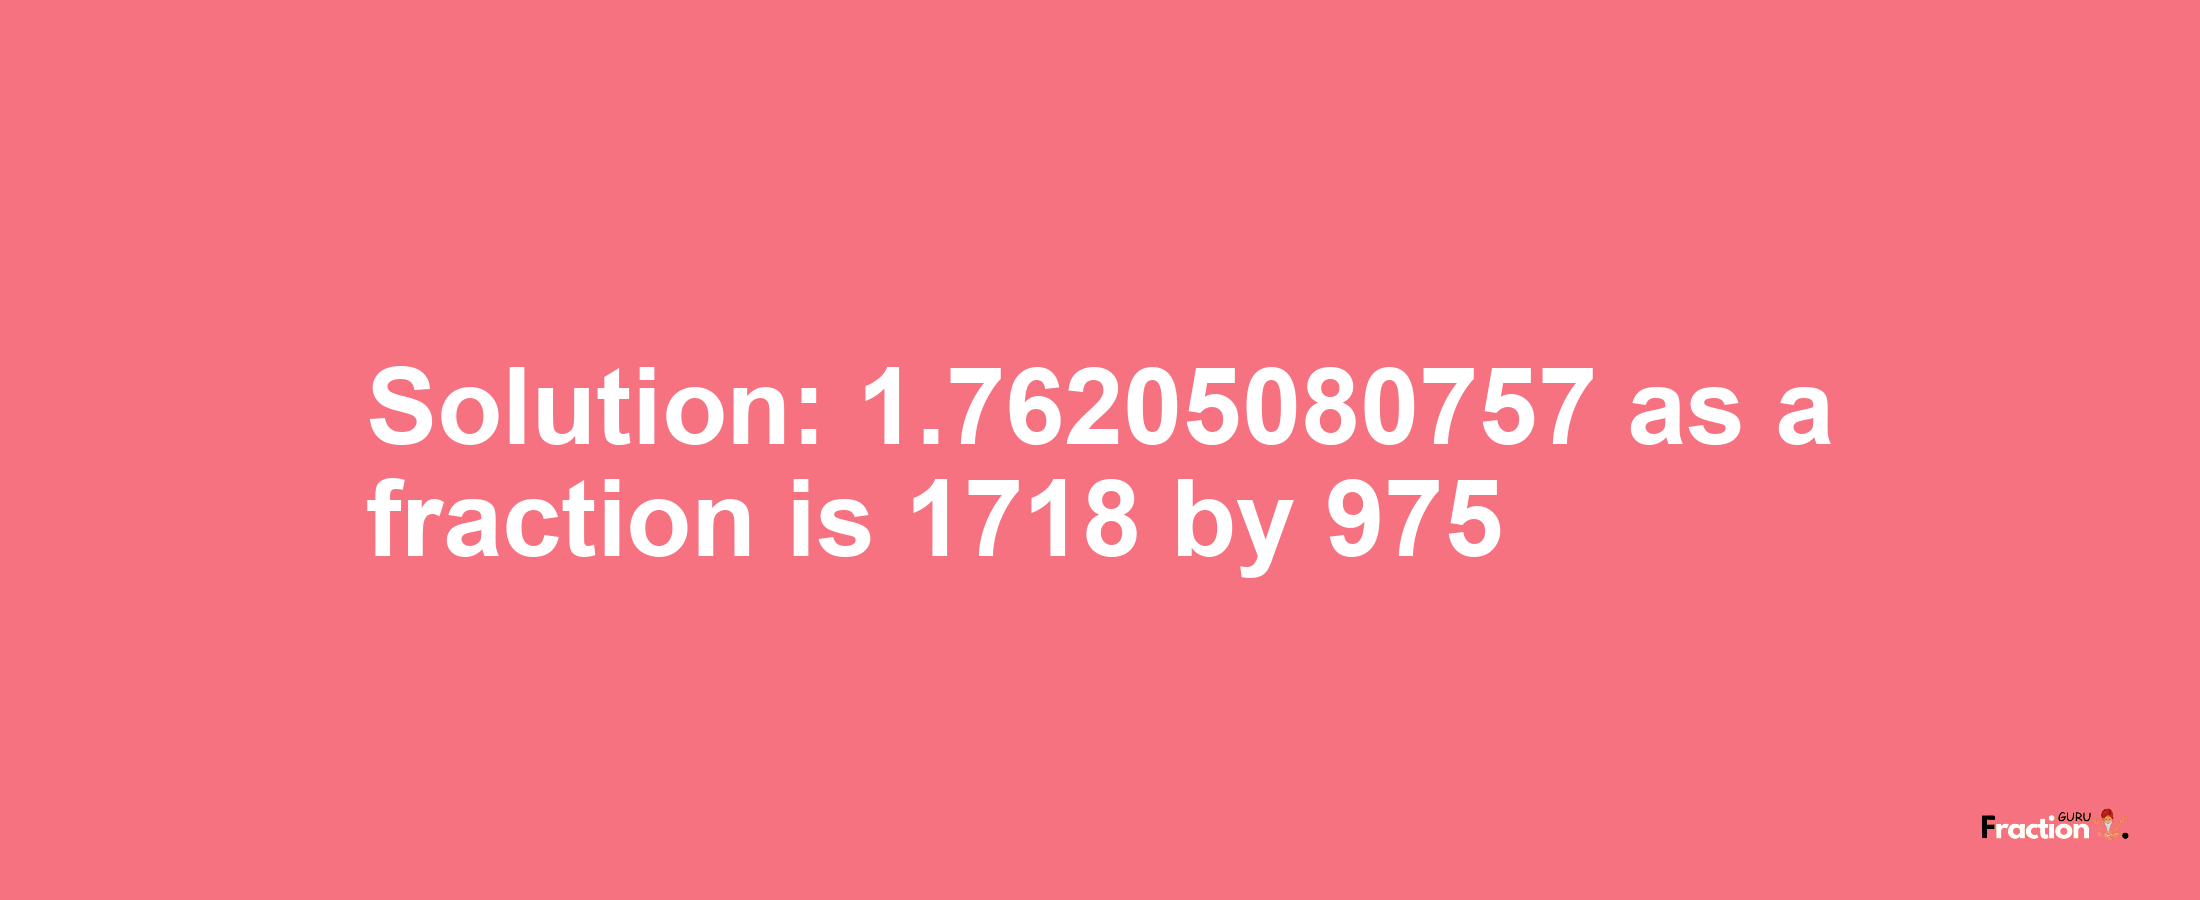 Solution:1.76205080757 as a fraction is 1718/975